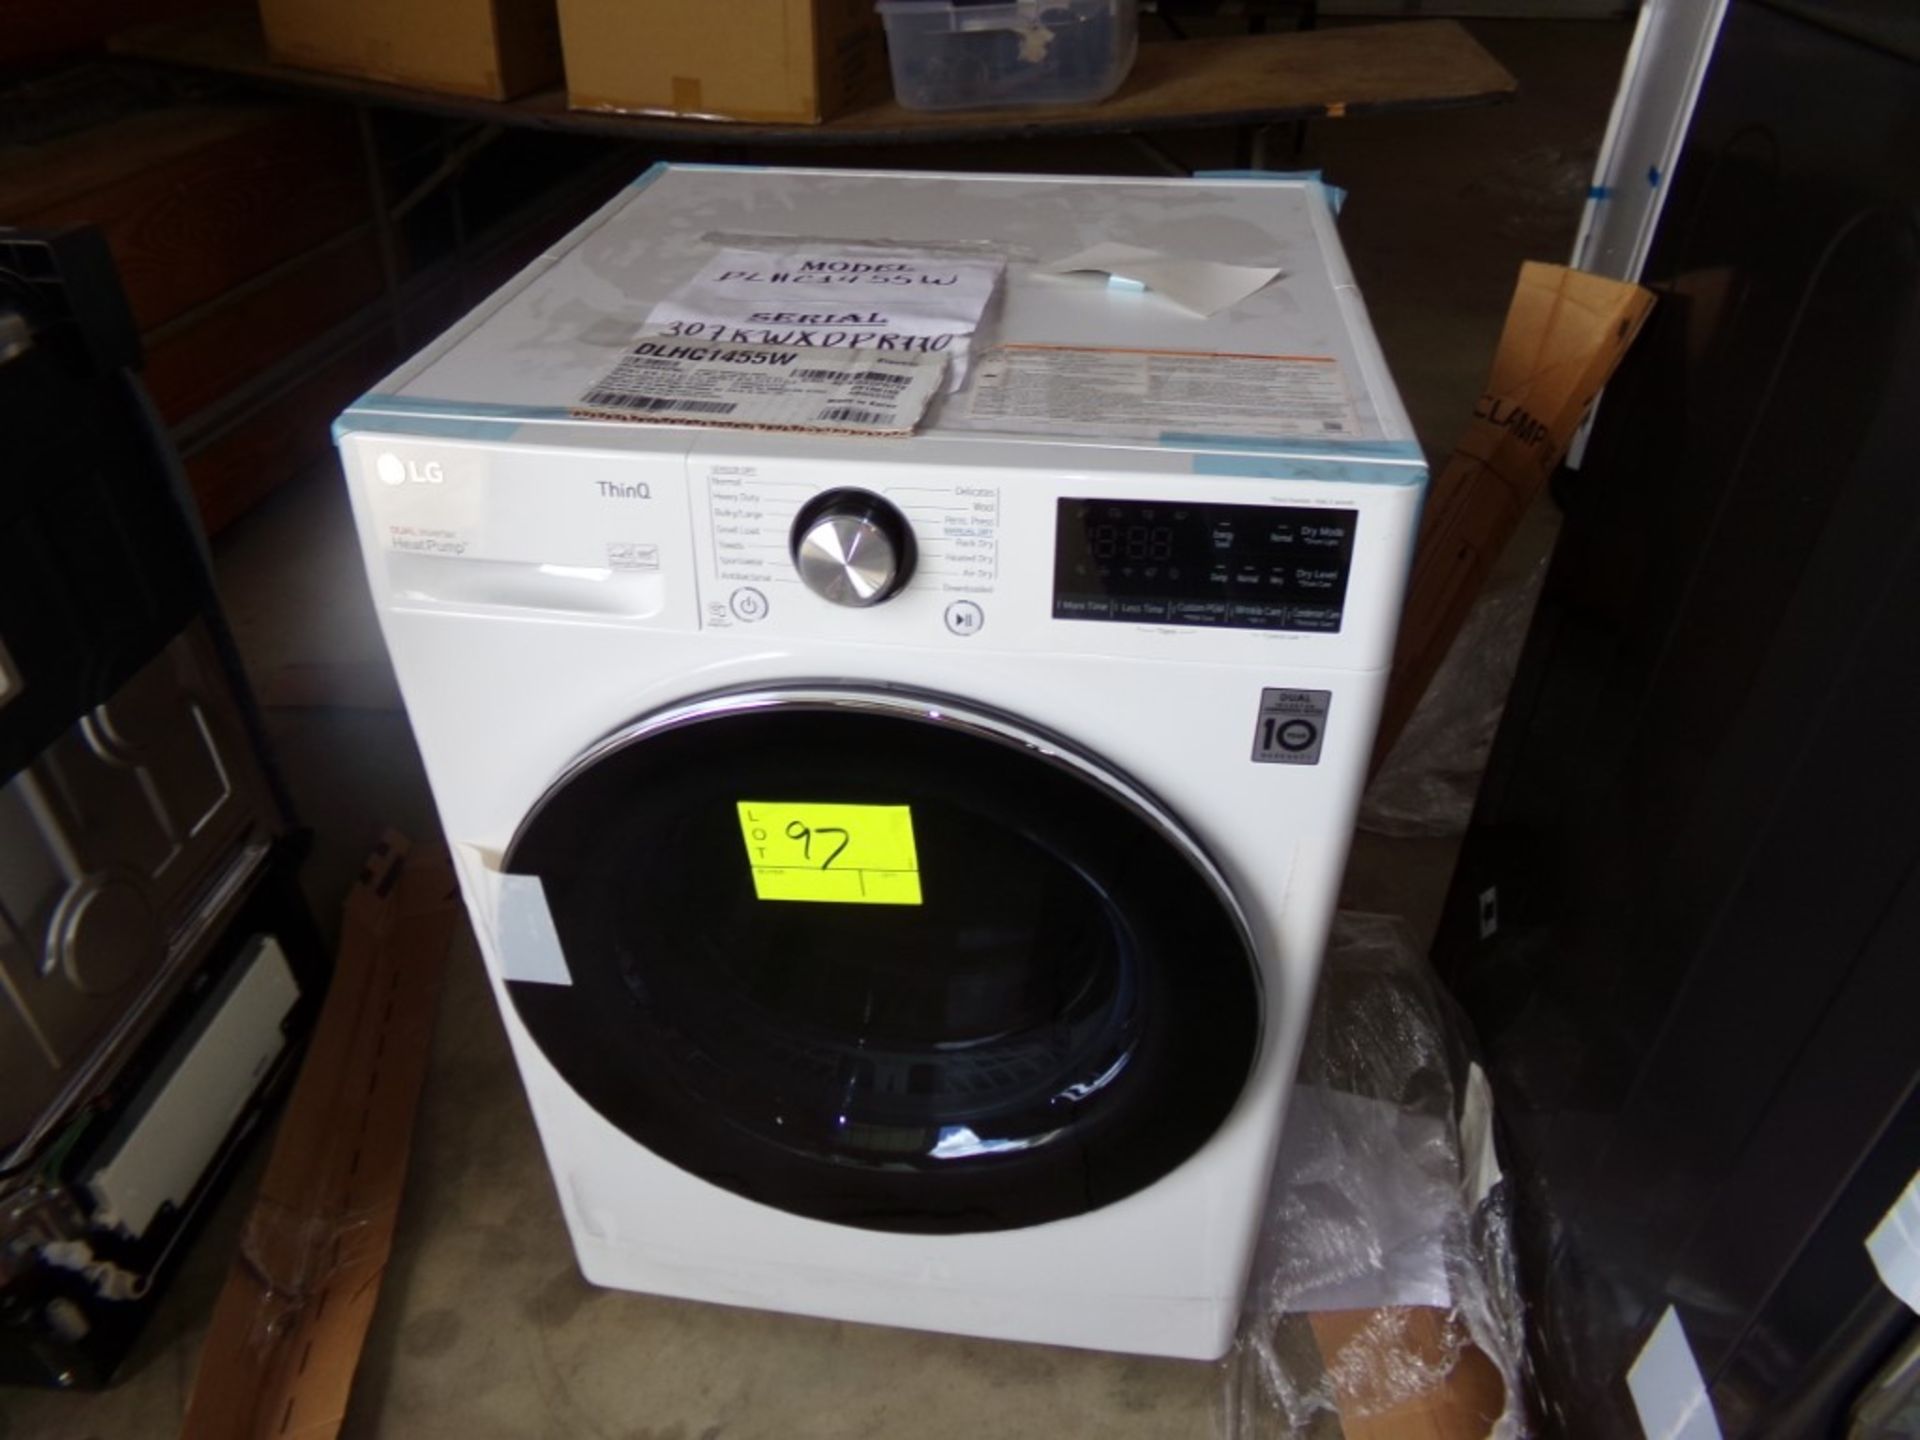 LG Thinq Model DLHC1455W Electric White Front Dryer, New, Scratch and Dent, SOLD AS IS